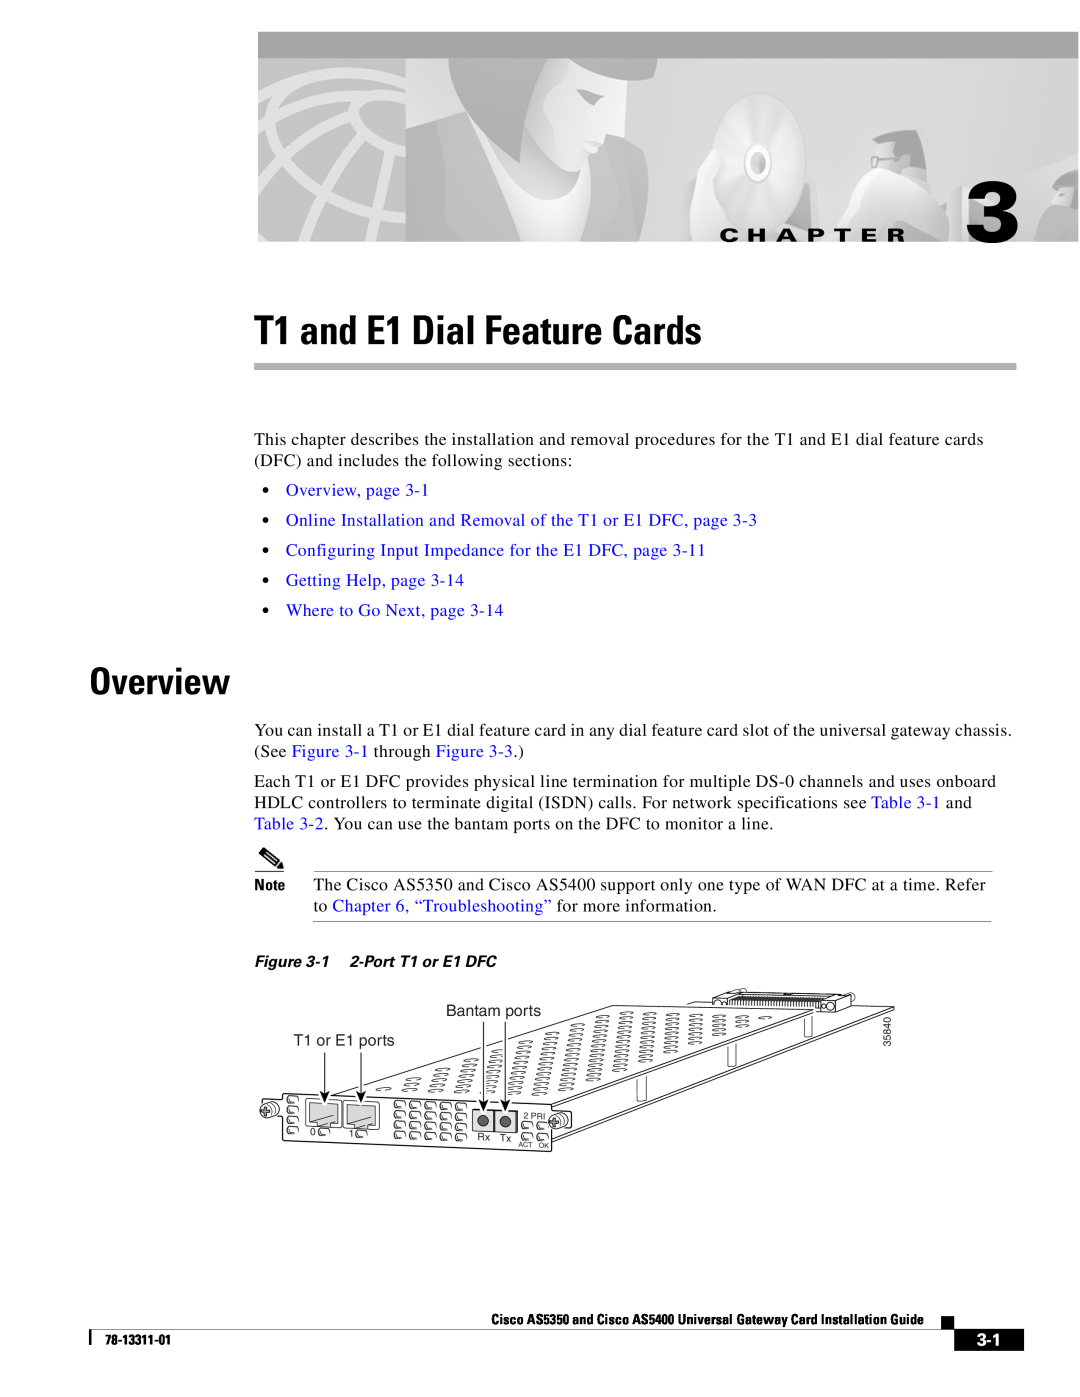 Cisco Systems AS5400 manual T1 and E1 Dial Feature Cards, Overview, page, Where to Go Next, page, C H A P T E R 